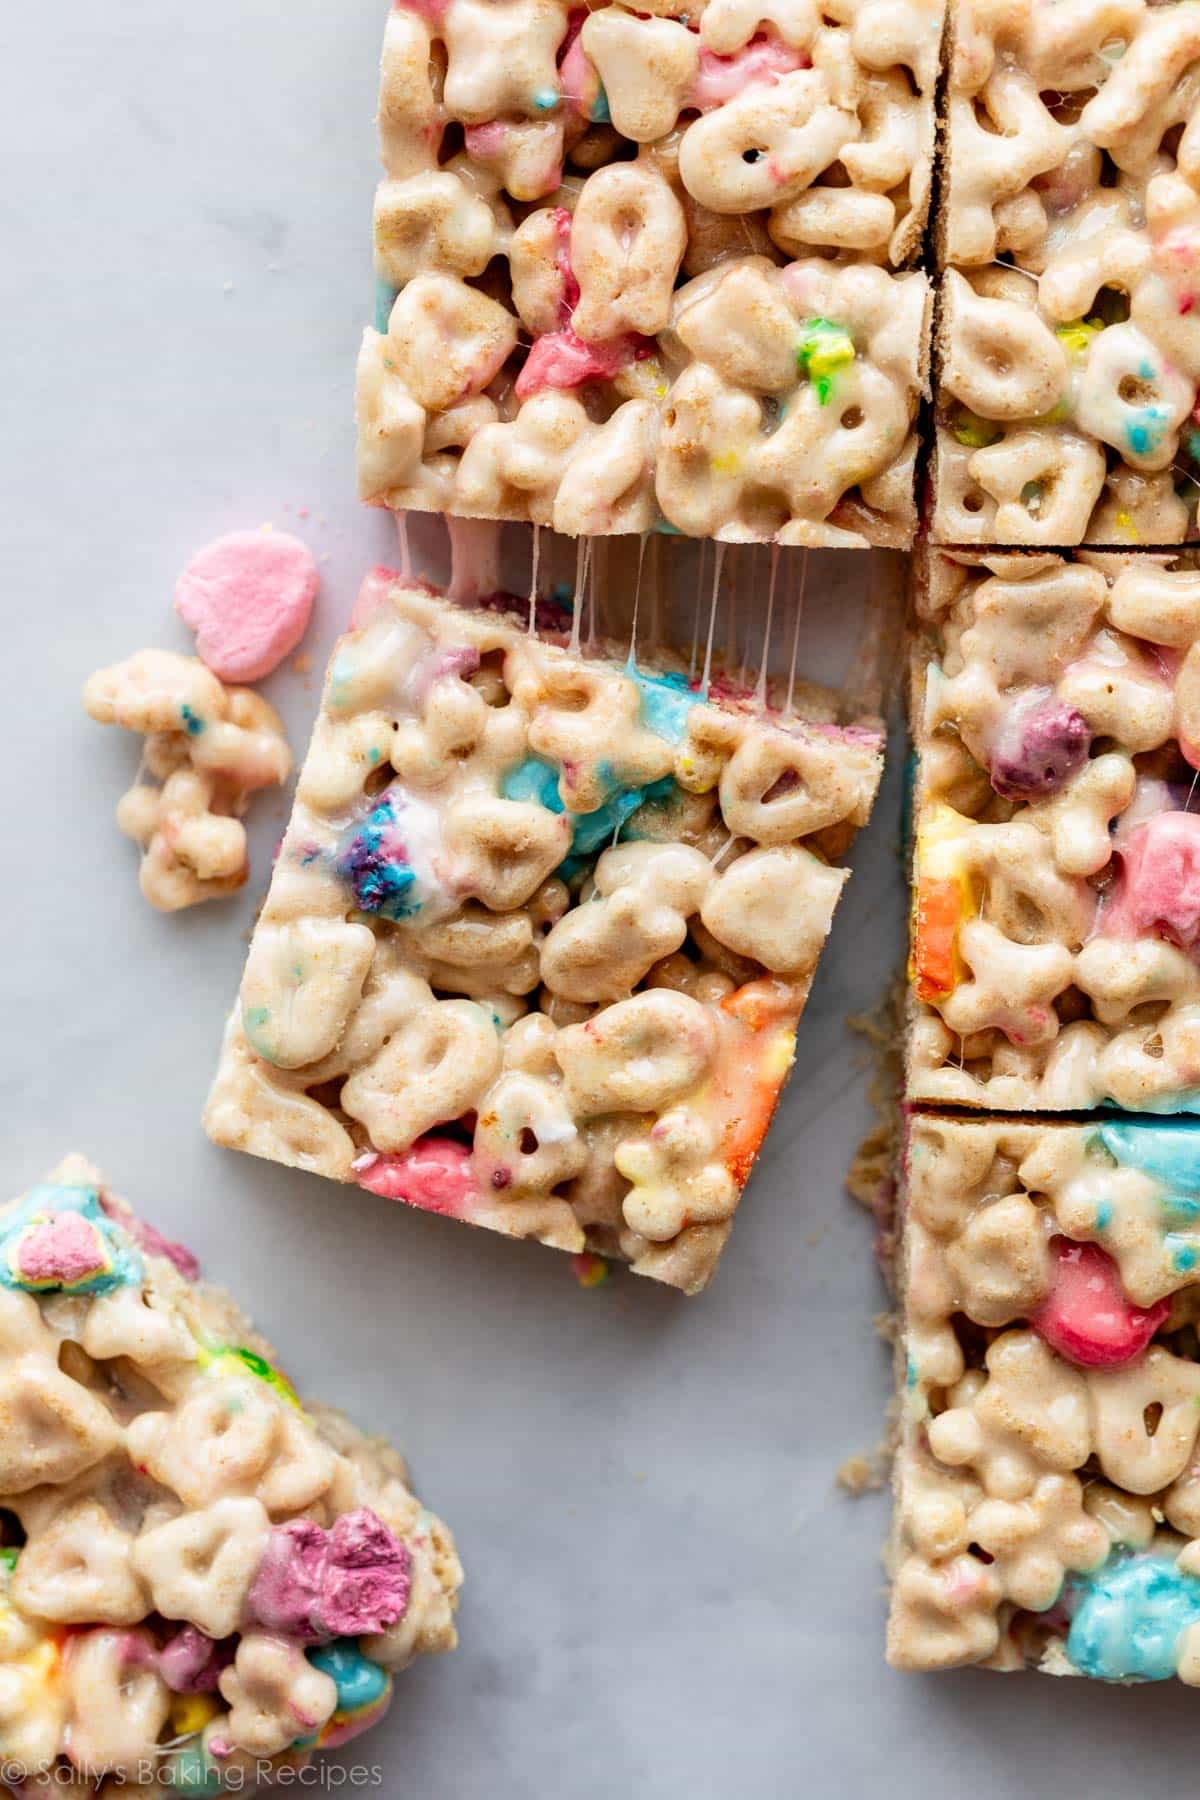 lucky charms marshmallow cereal treats cut into squares on parchment paper.